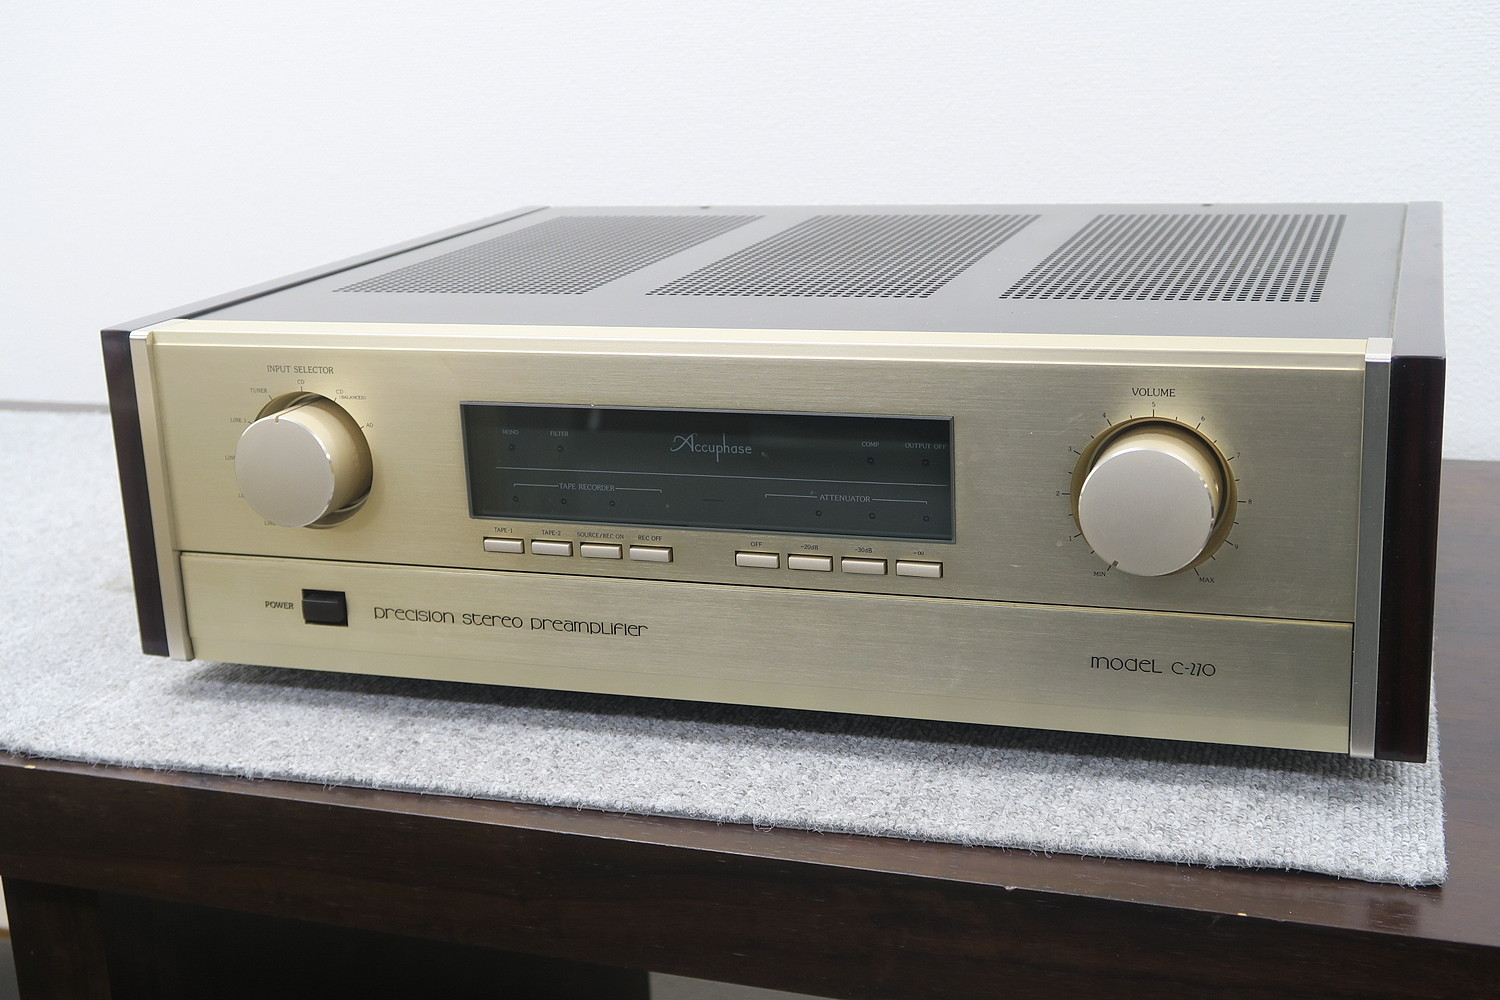 Aランク】アキュフェーズ Accuphase C-270 プリアンプ 元箱付 @49133 